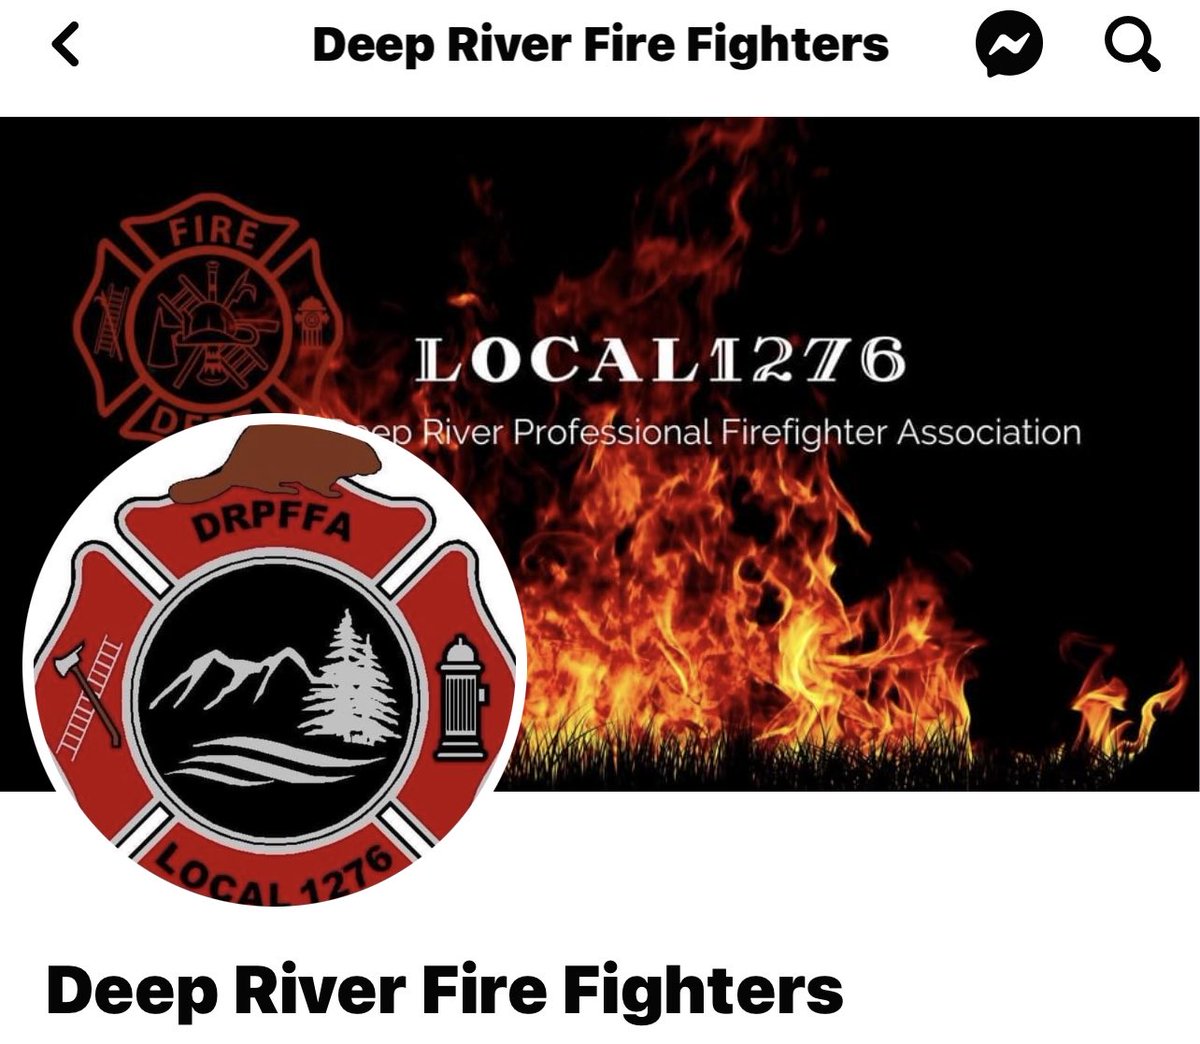 Run Forrest Run Thank You Deep River Professional Firefighters Local 1276 for endorsing me and supporting me in my re-election as IAFF Canadian Trustee - Proud of my support across Every corner of Canada